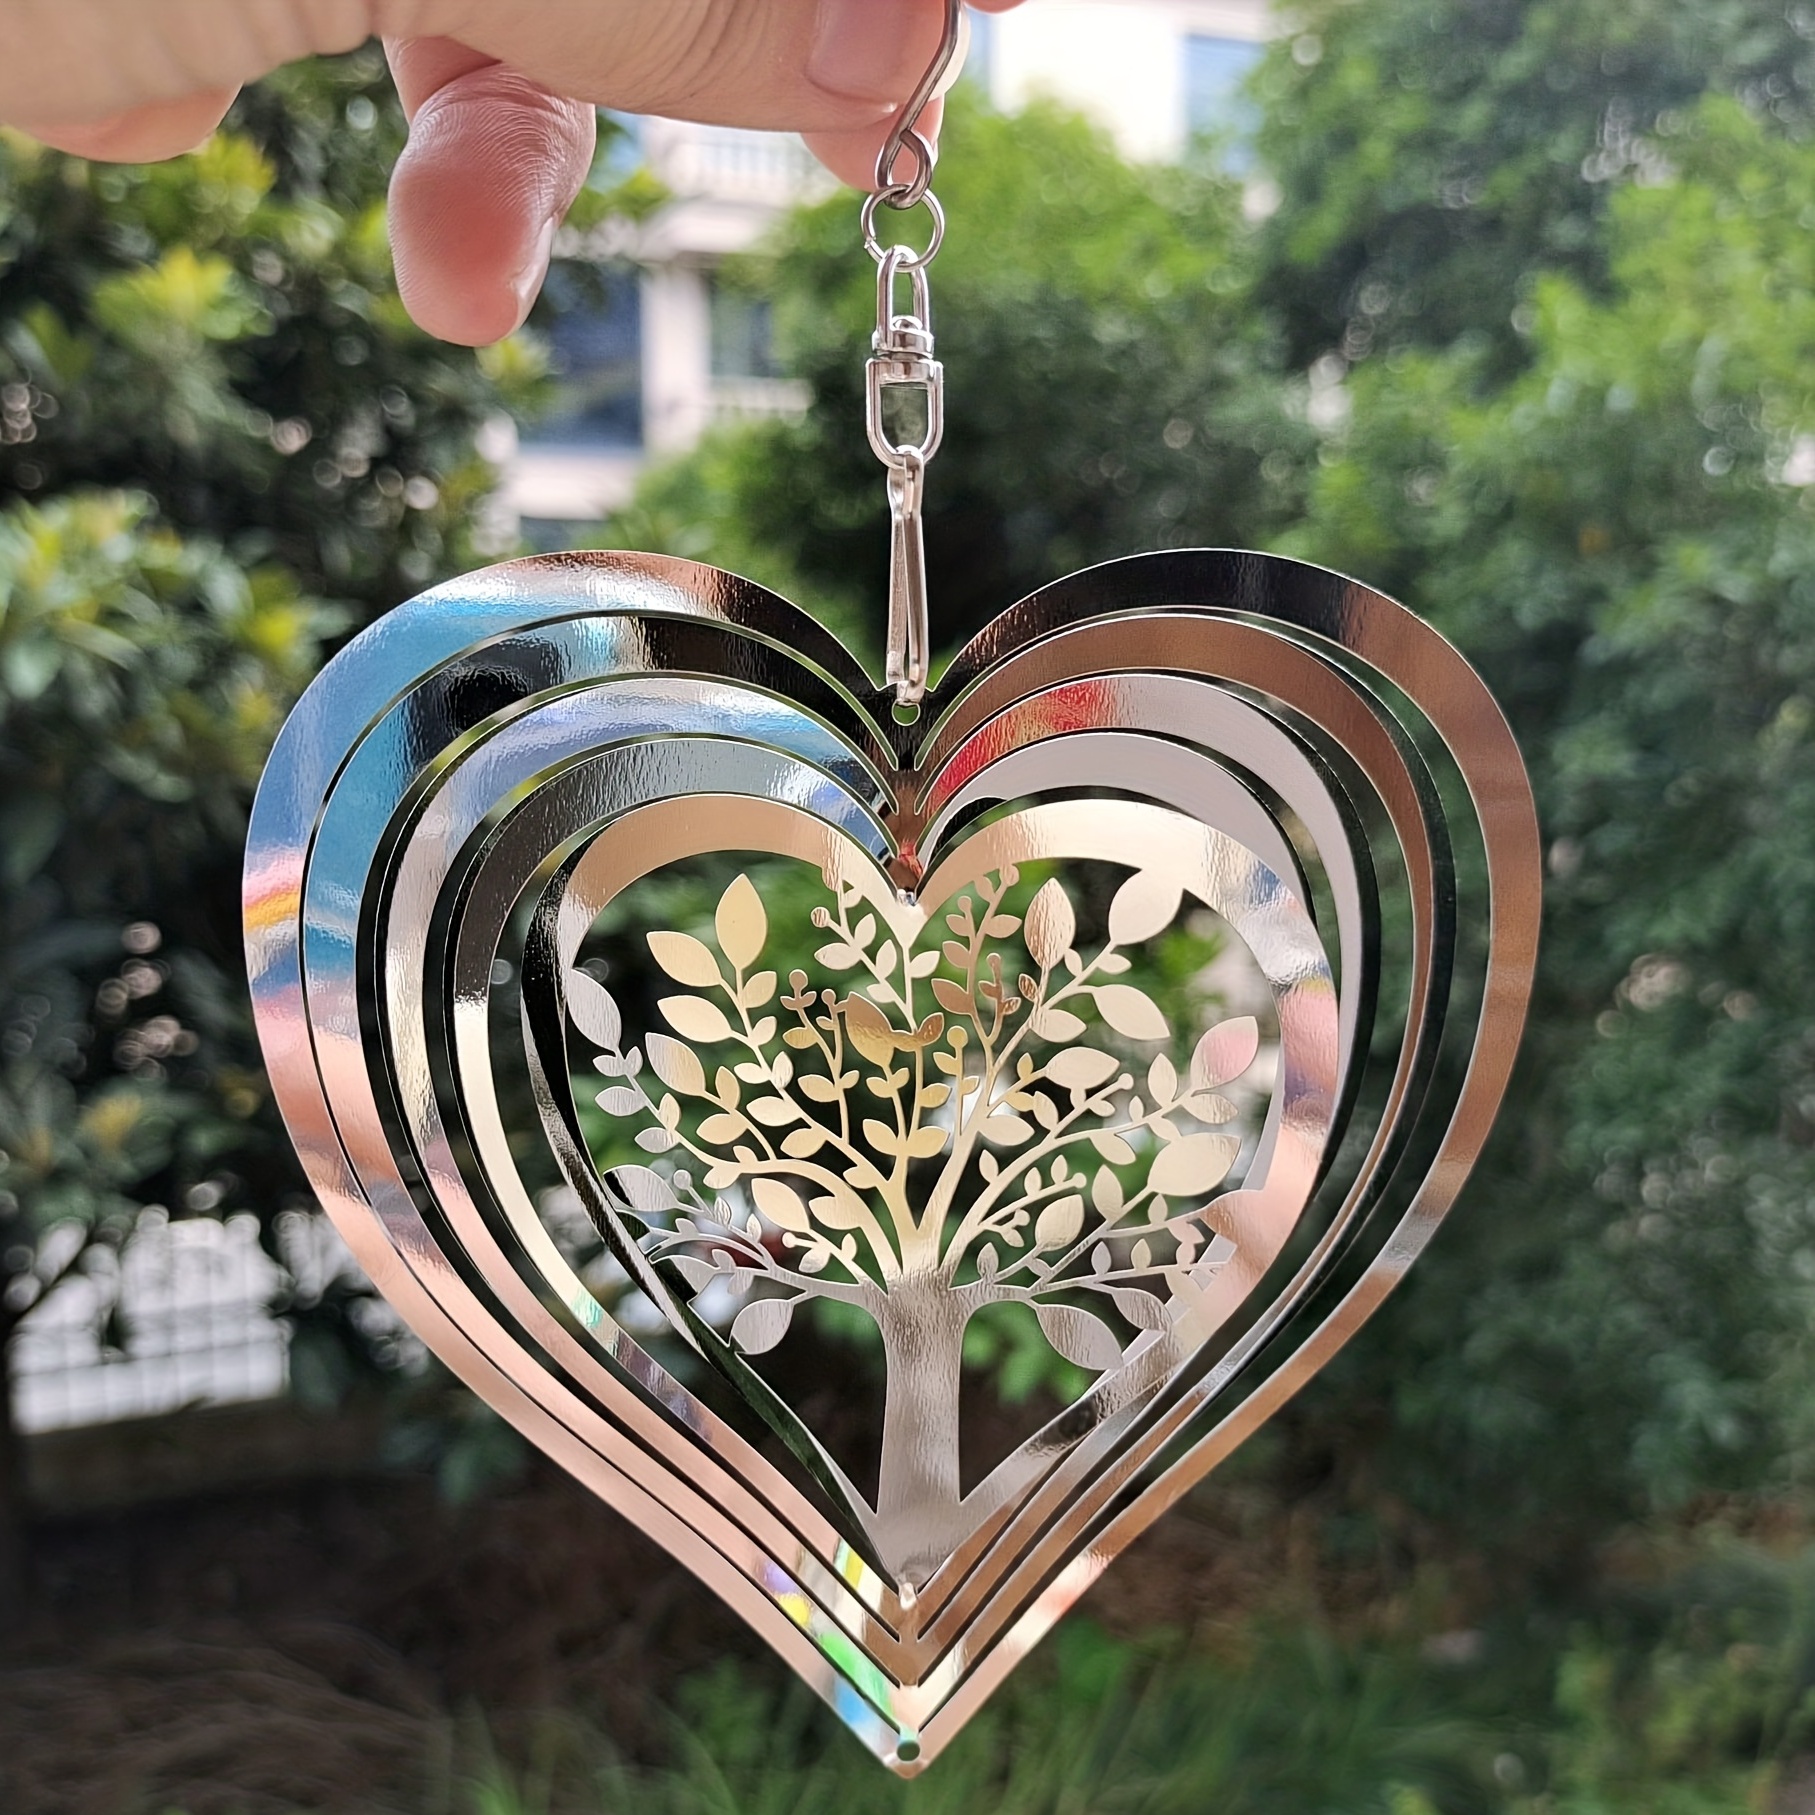 

1pc 3d Color Rotation Heart Shape The Tree Of Life Metal Wind Chime Sun Catcher Stainless Steel Metal Hanging Wind Spinner Home Garden Decoration, Silvery